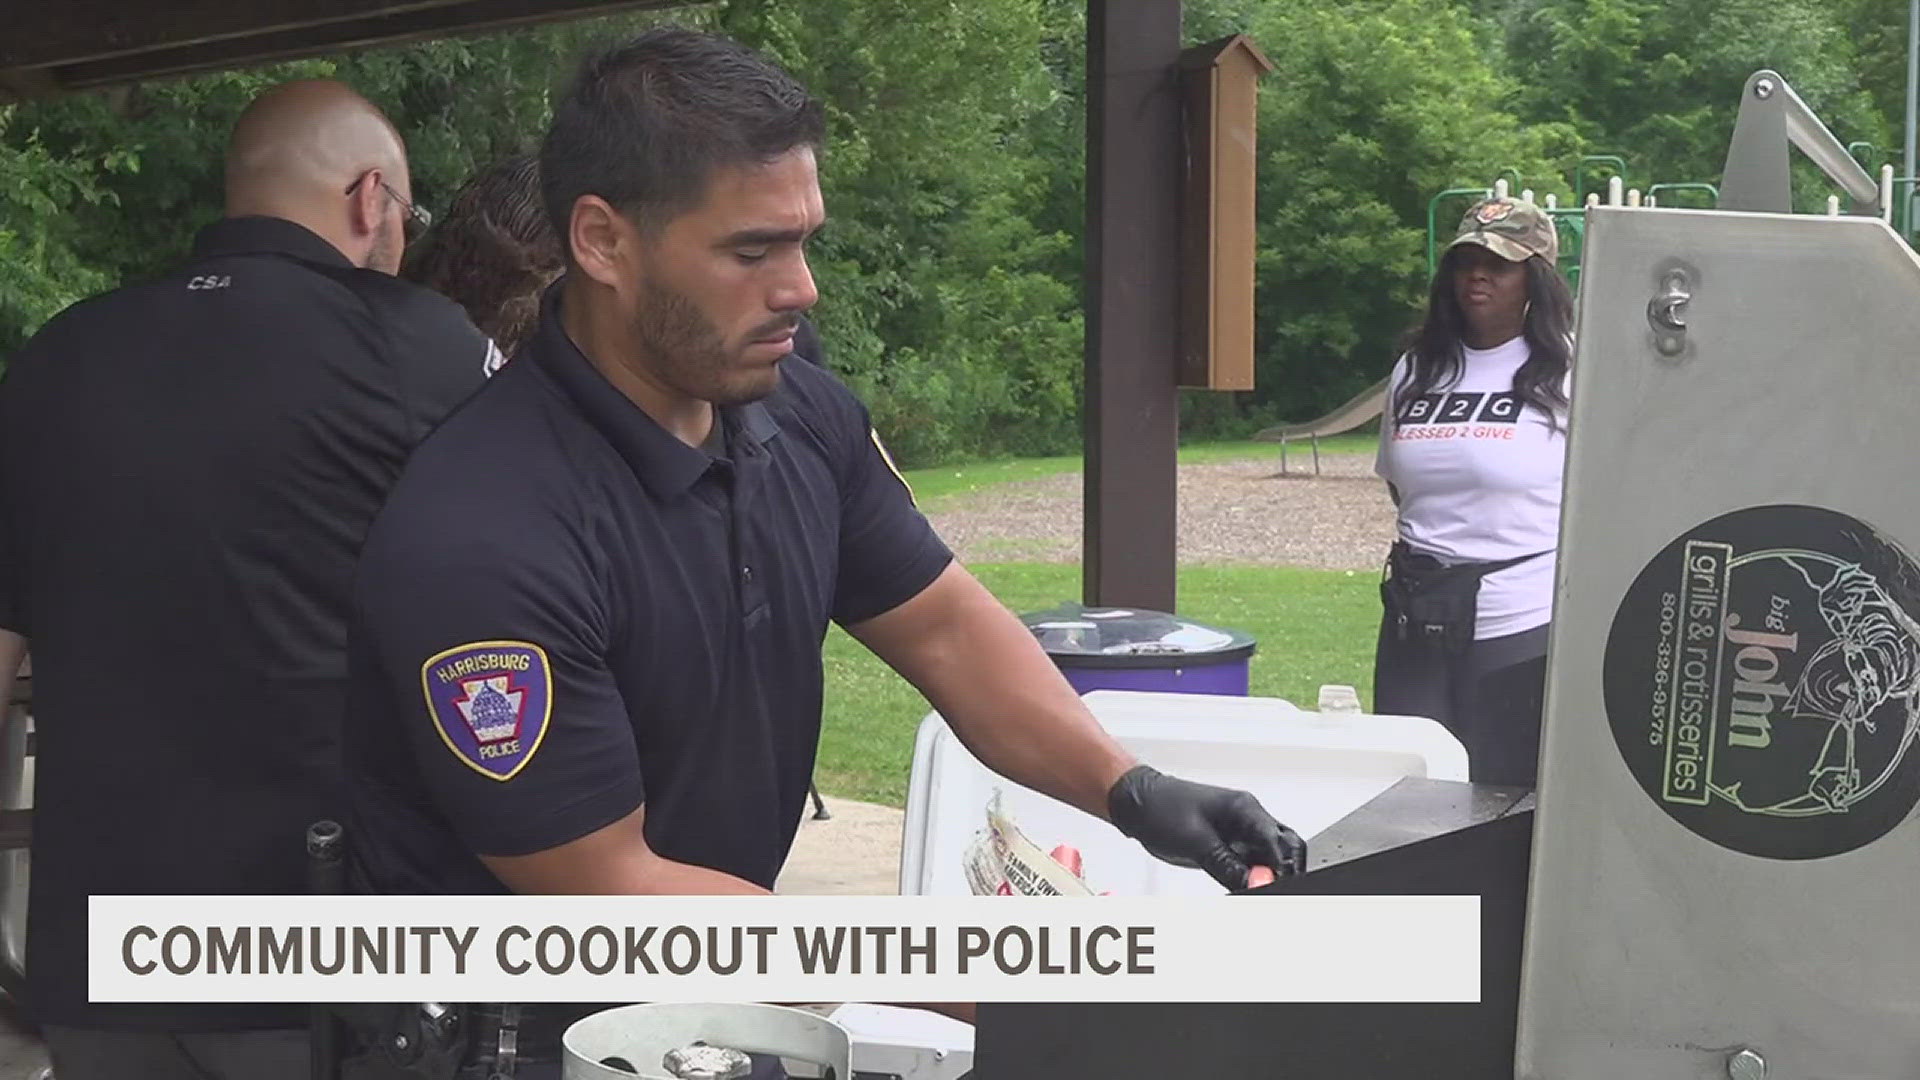 The cookout allowed community members and police to enjoy a meal together and continuing to build trust.